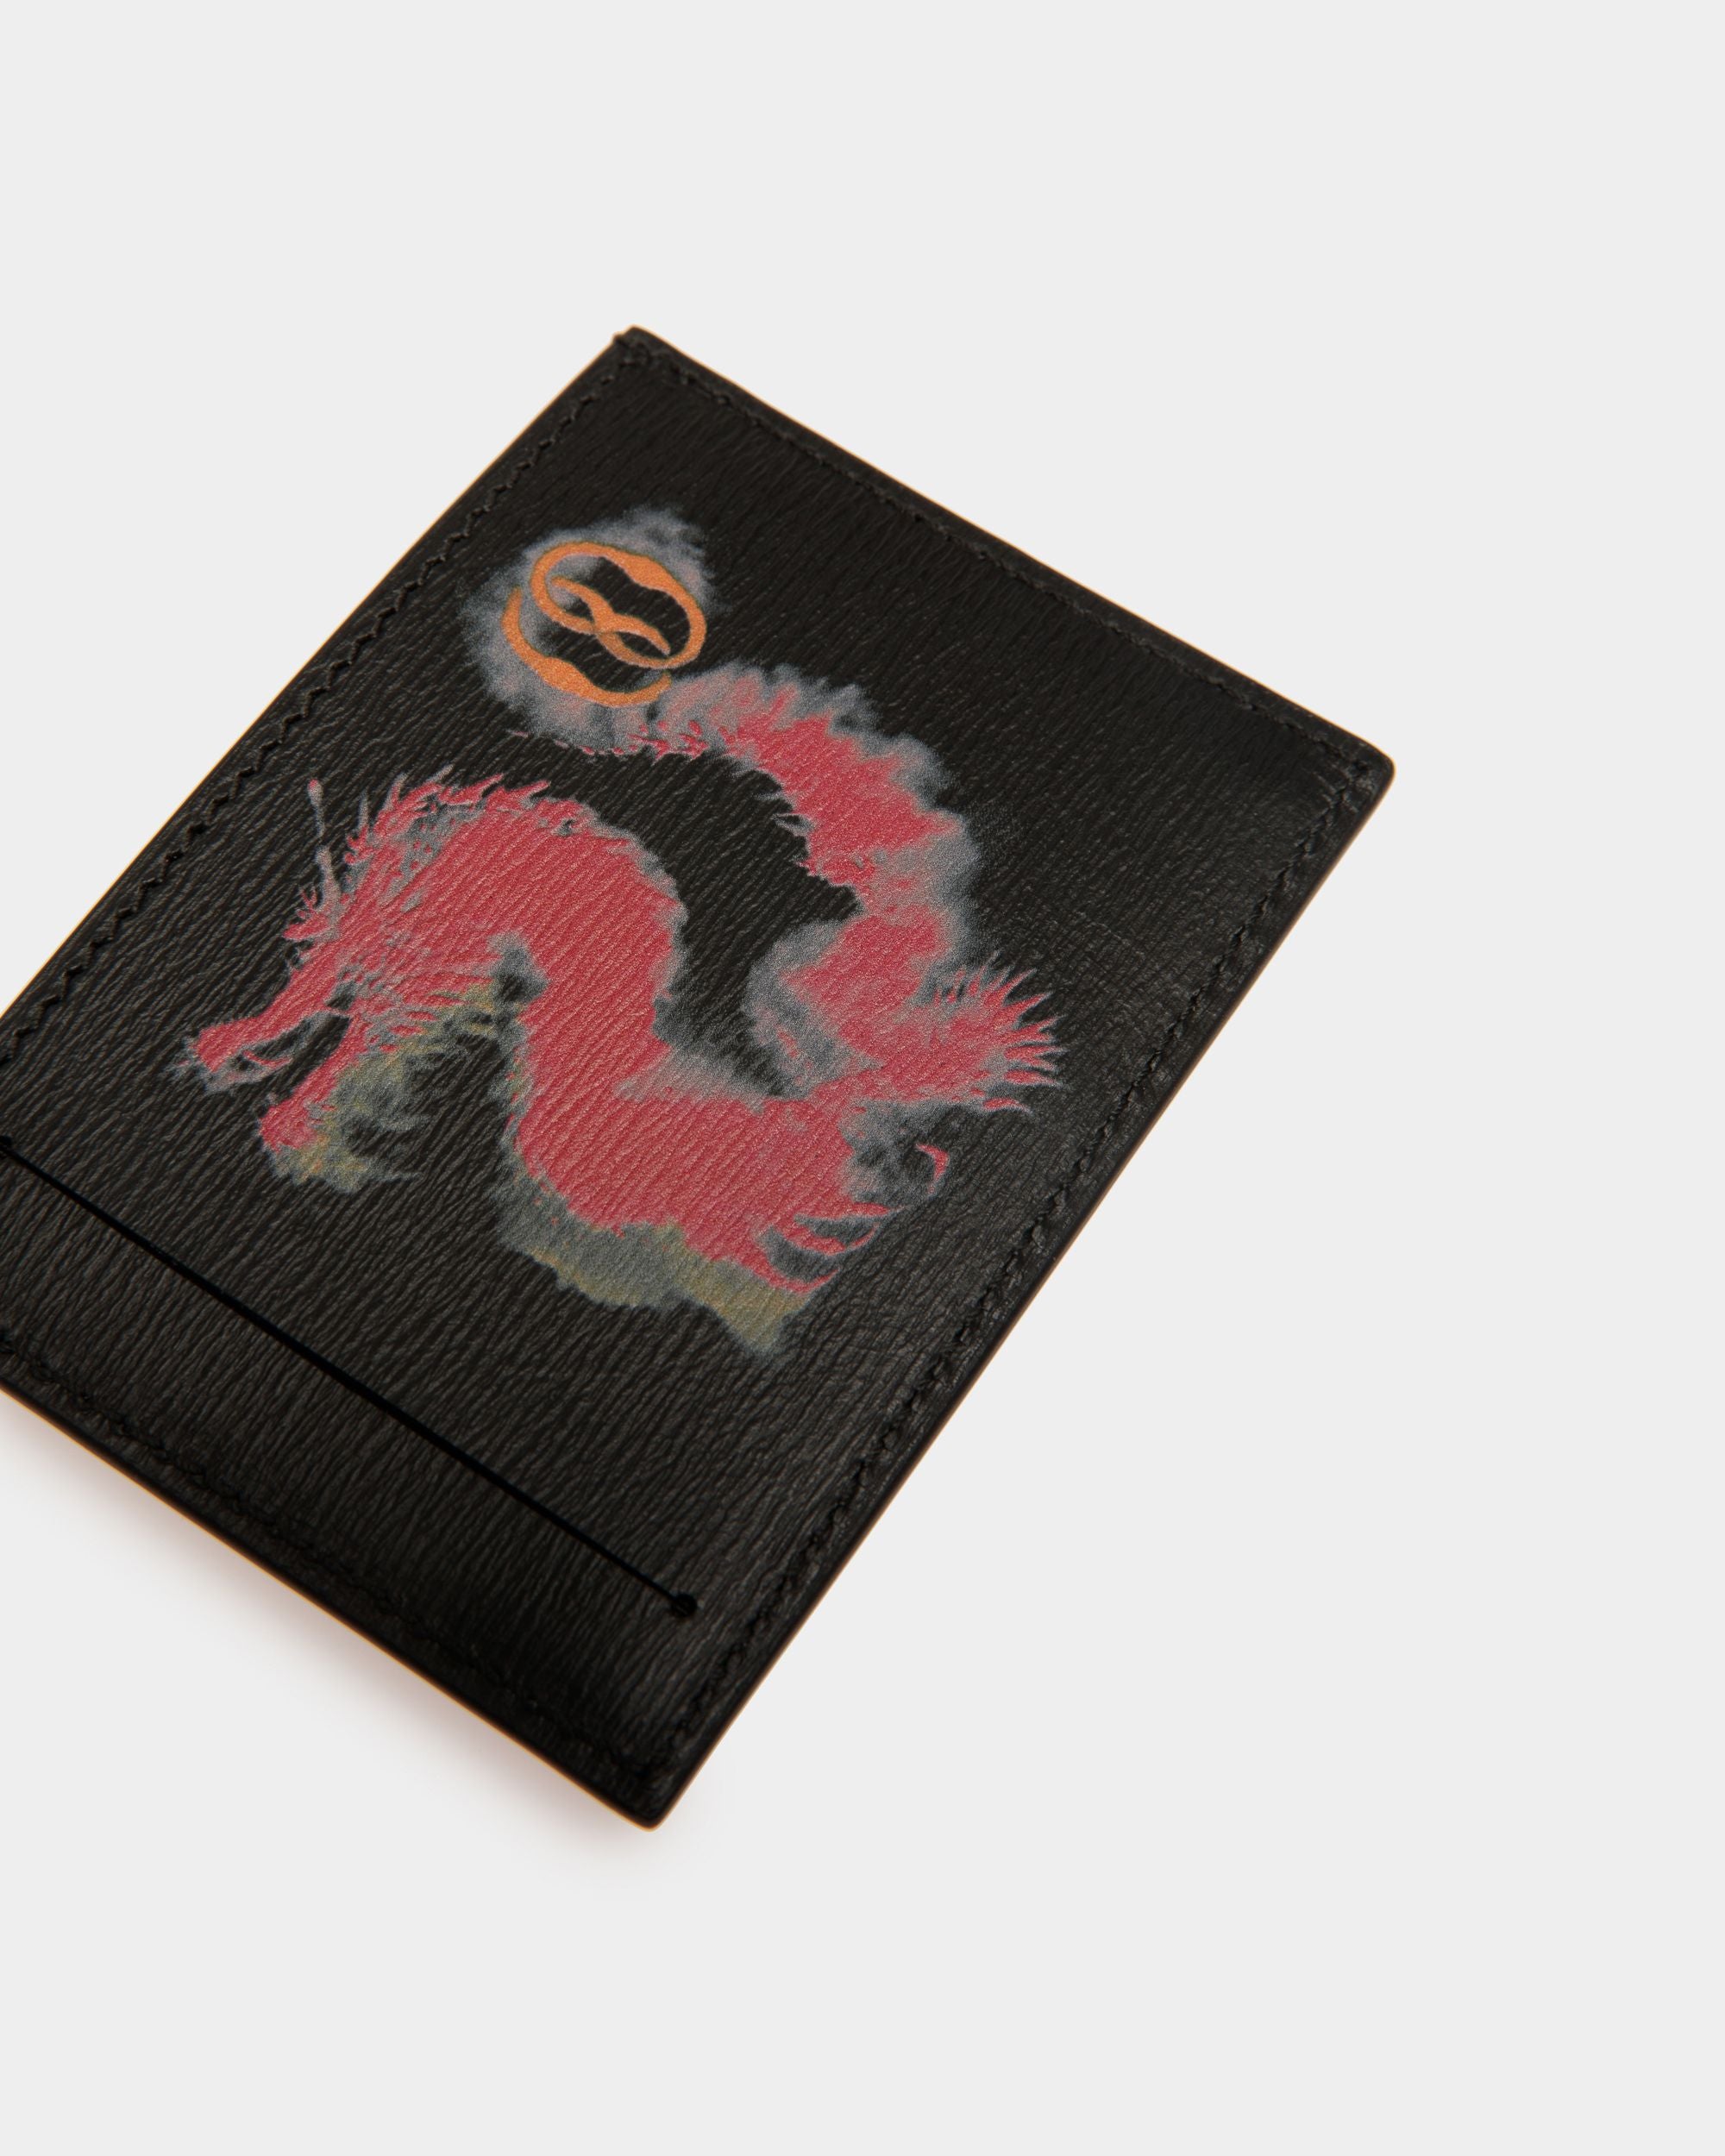 Cny | Men's Card Holder in Black And Red Grained Leather | Bally | Still Life Detail